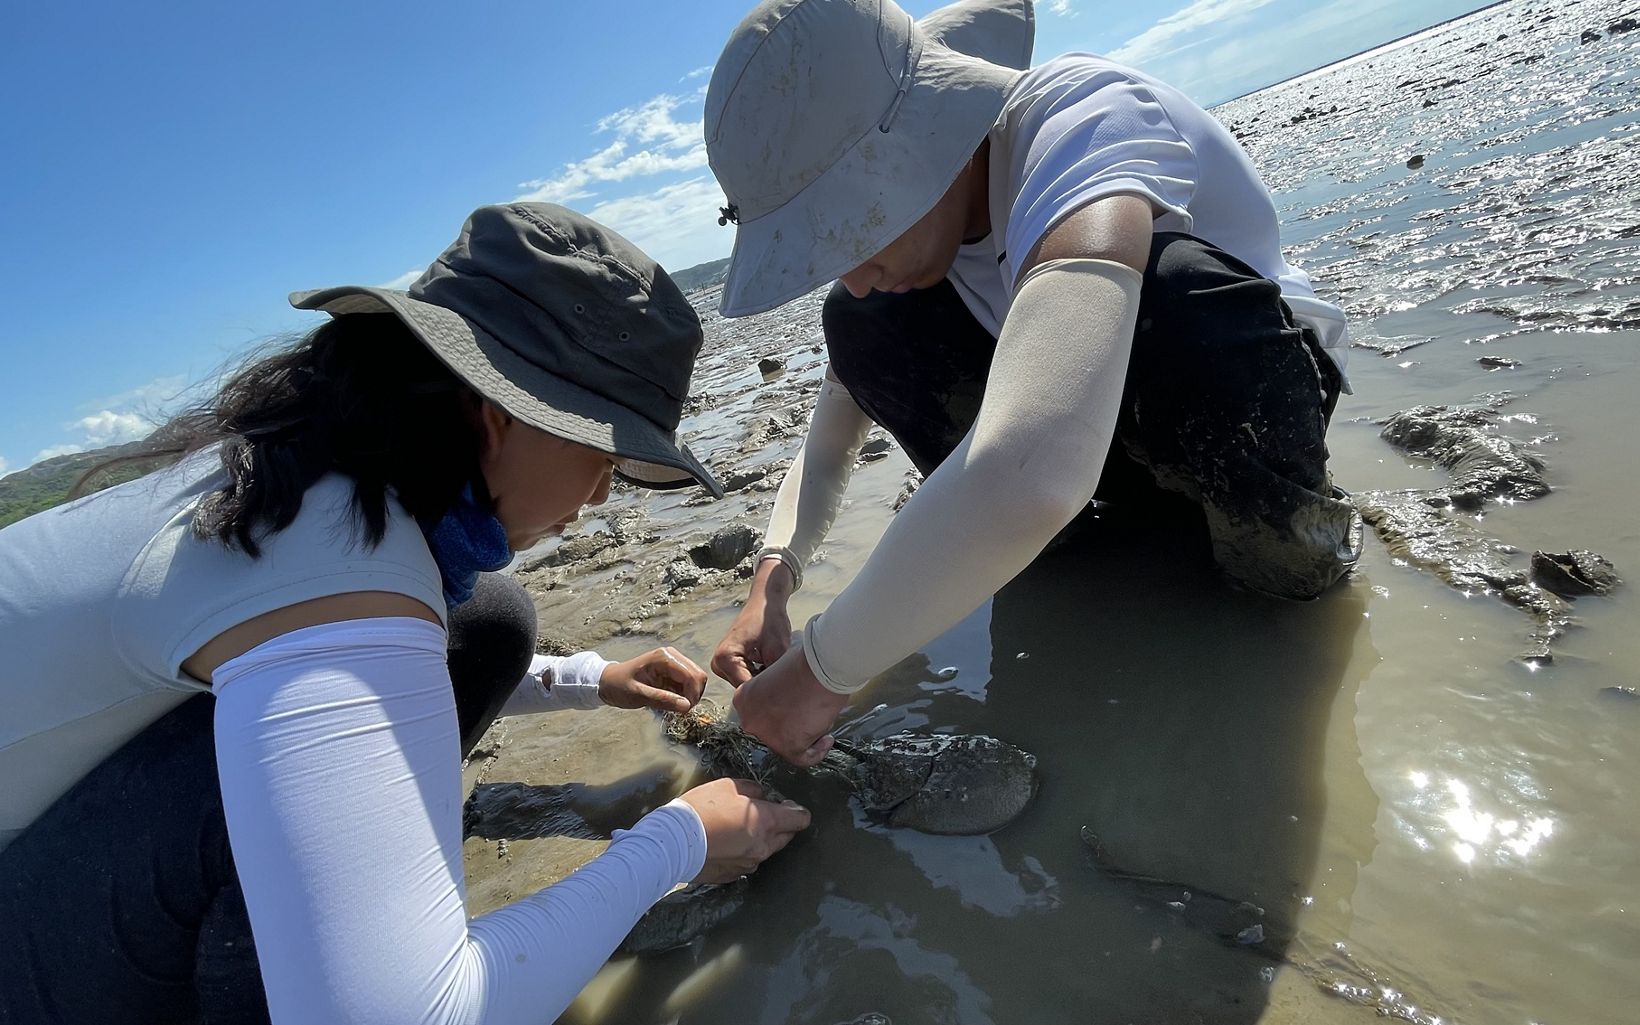 Two young women try to untie a horseshoe crab in a mudflat